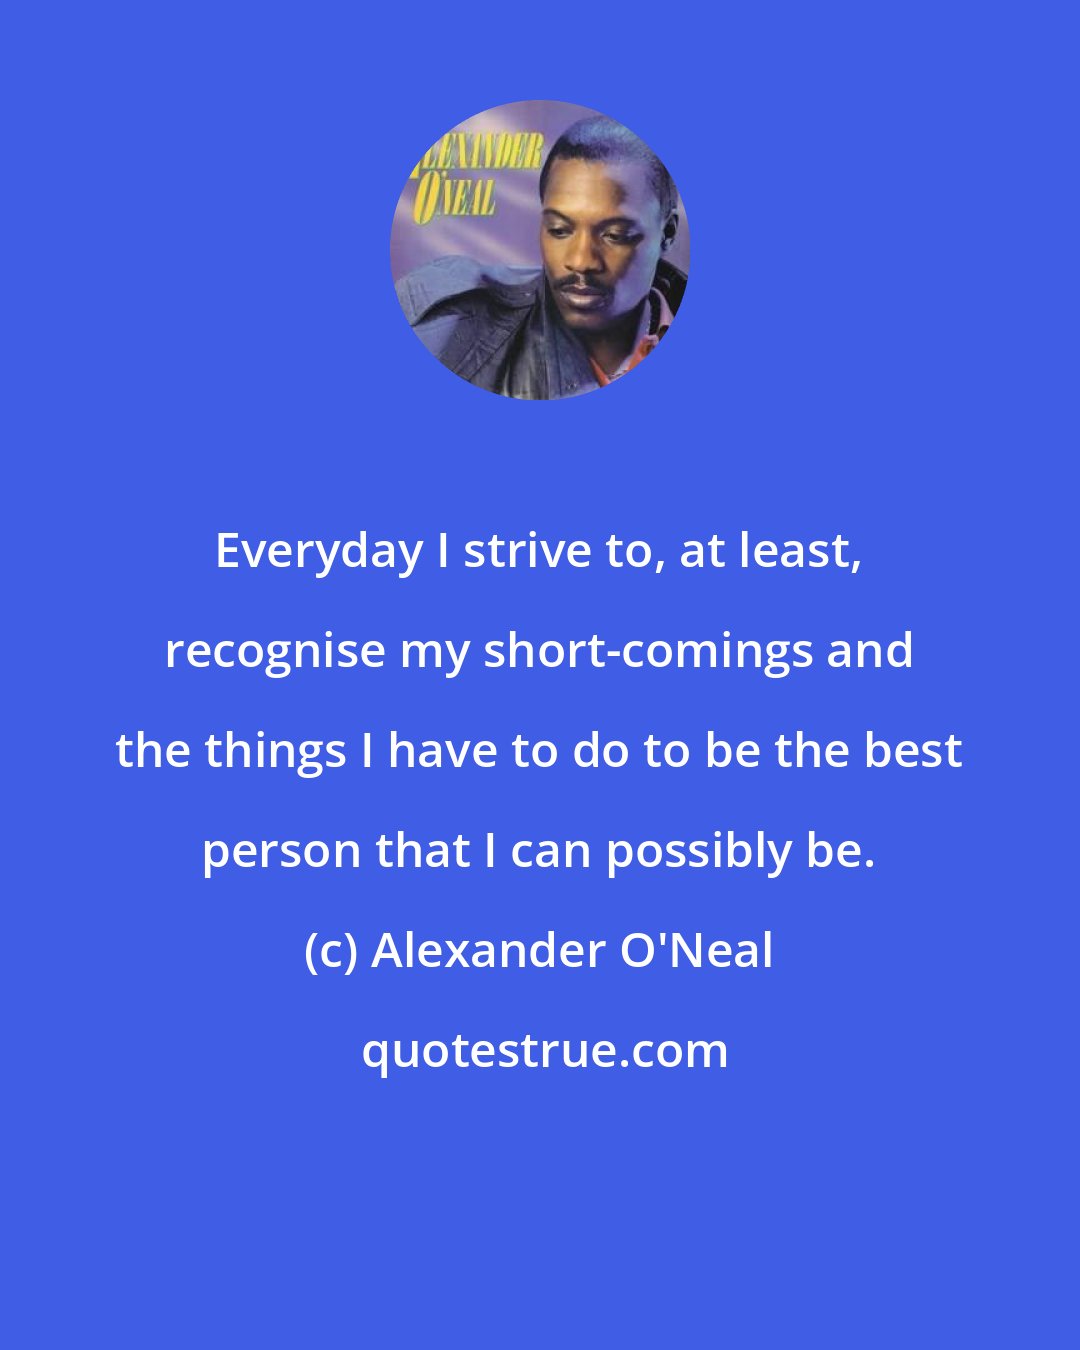 Alexander O'Neal: Everyday I strive to, at least, recognise my short-comings and the things I have to do to be the best person that I can possibly be.